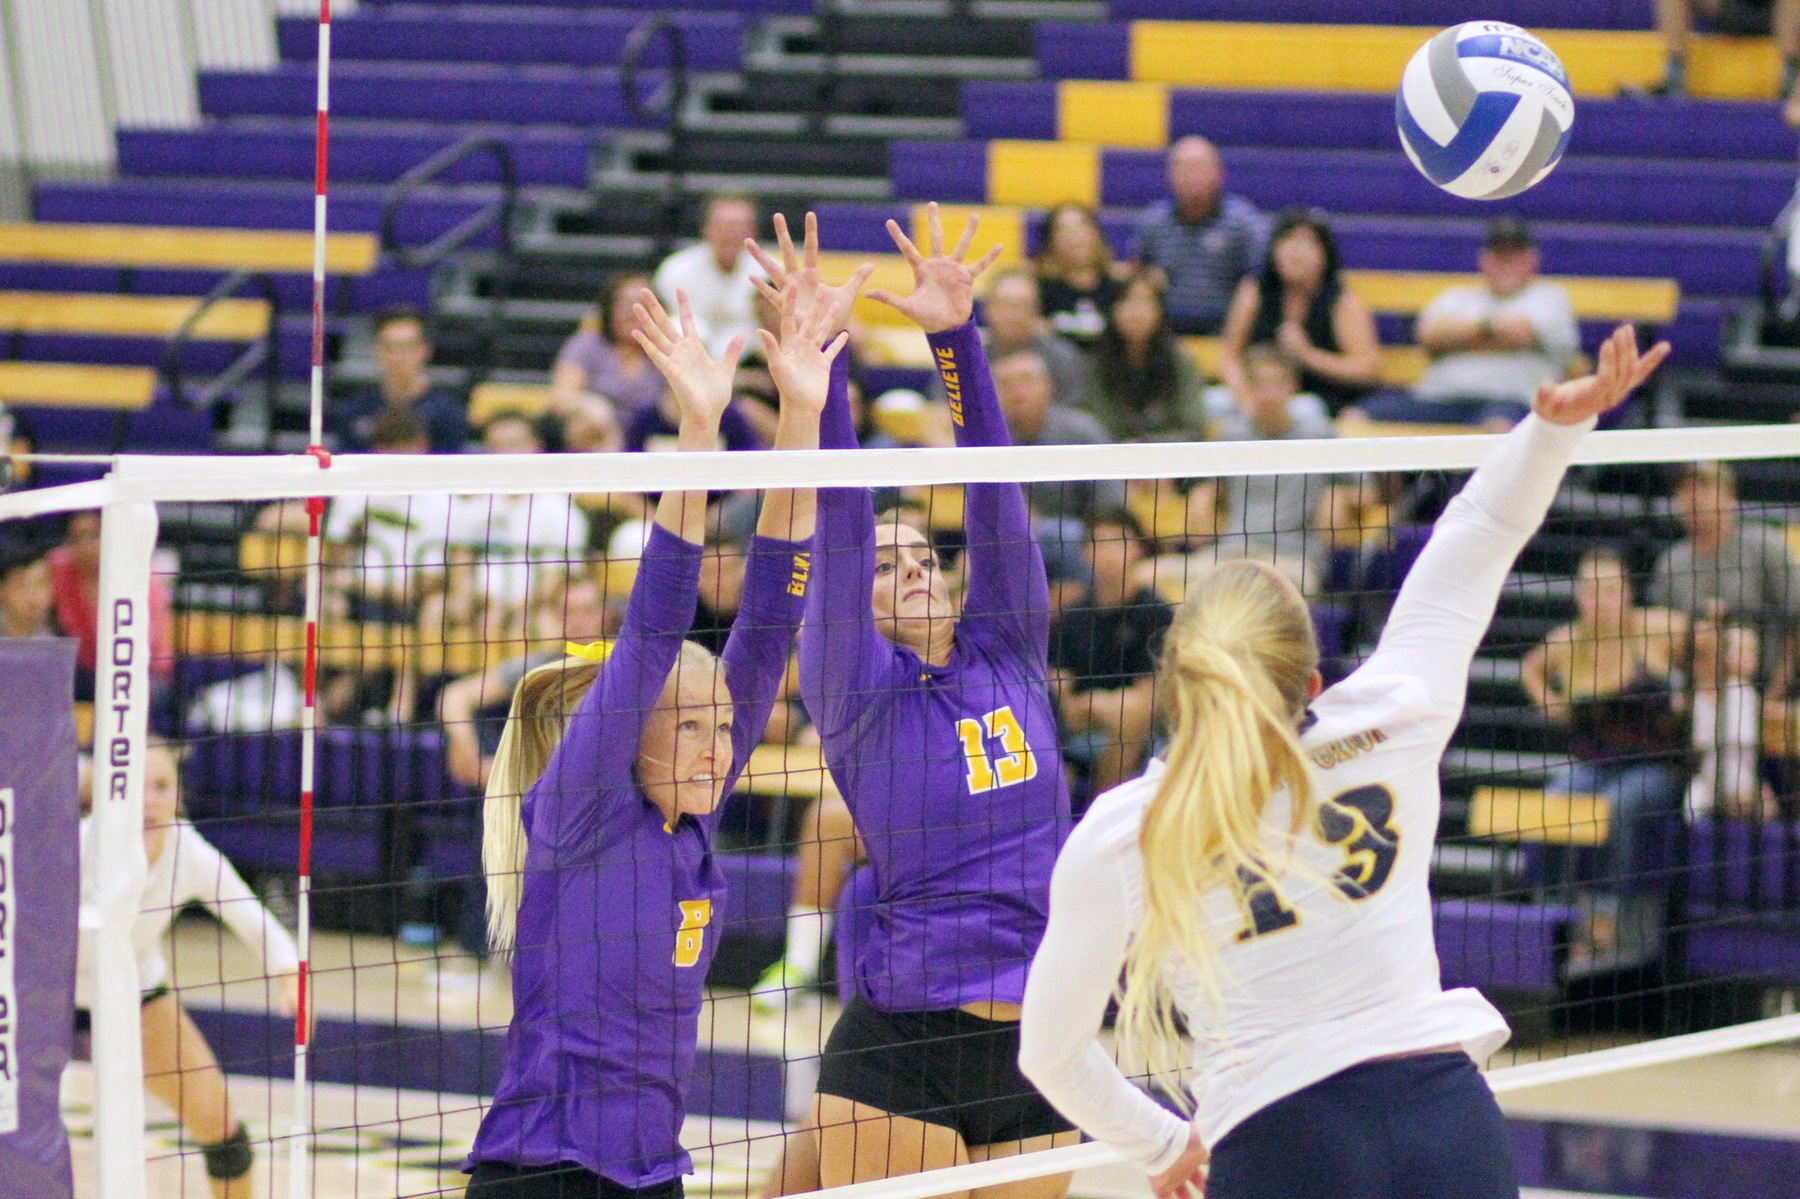 Jamie Smith (L) and Paris Dosch go up for a block against UCSC. (Photo: Tracy L. Olson)